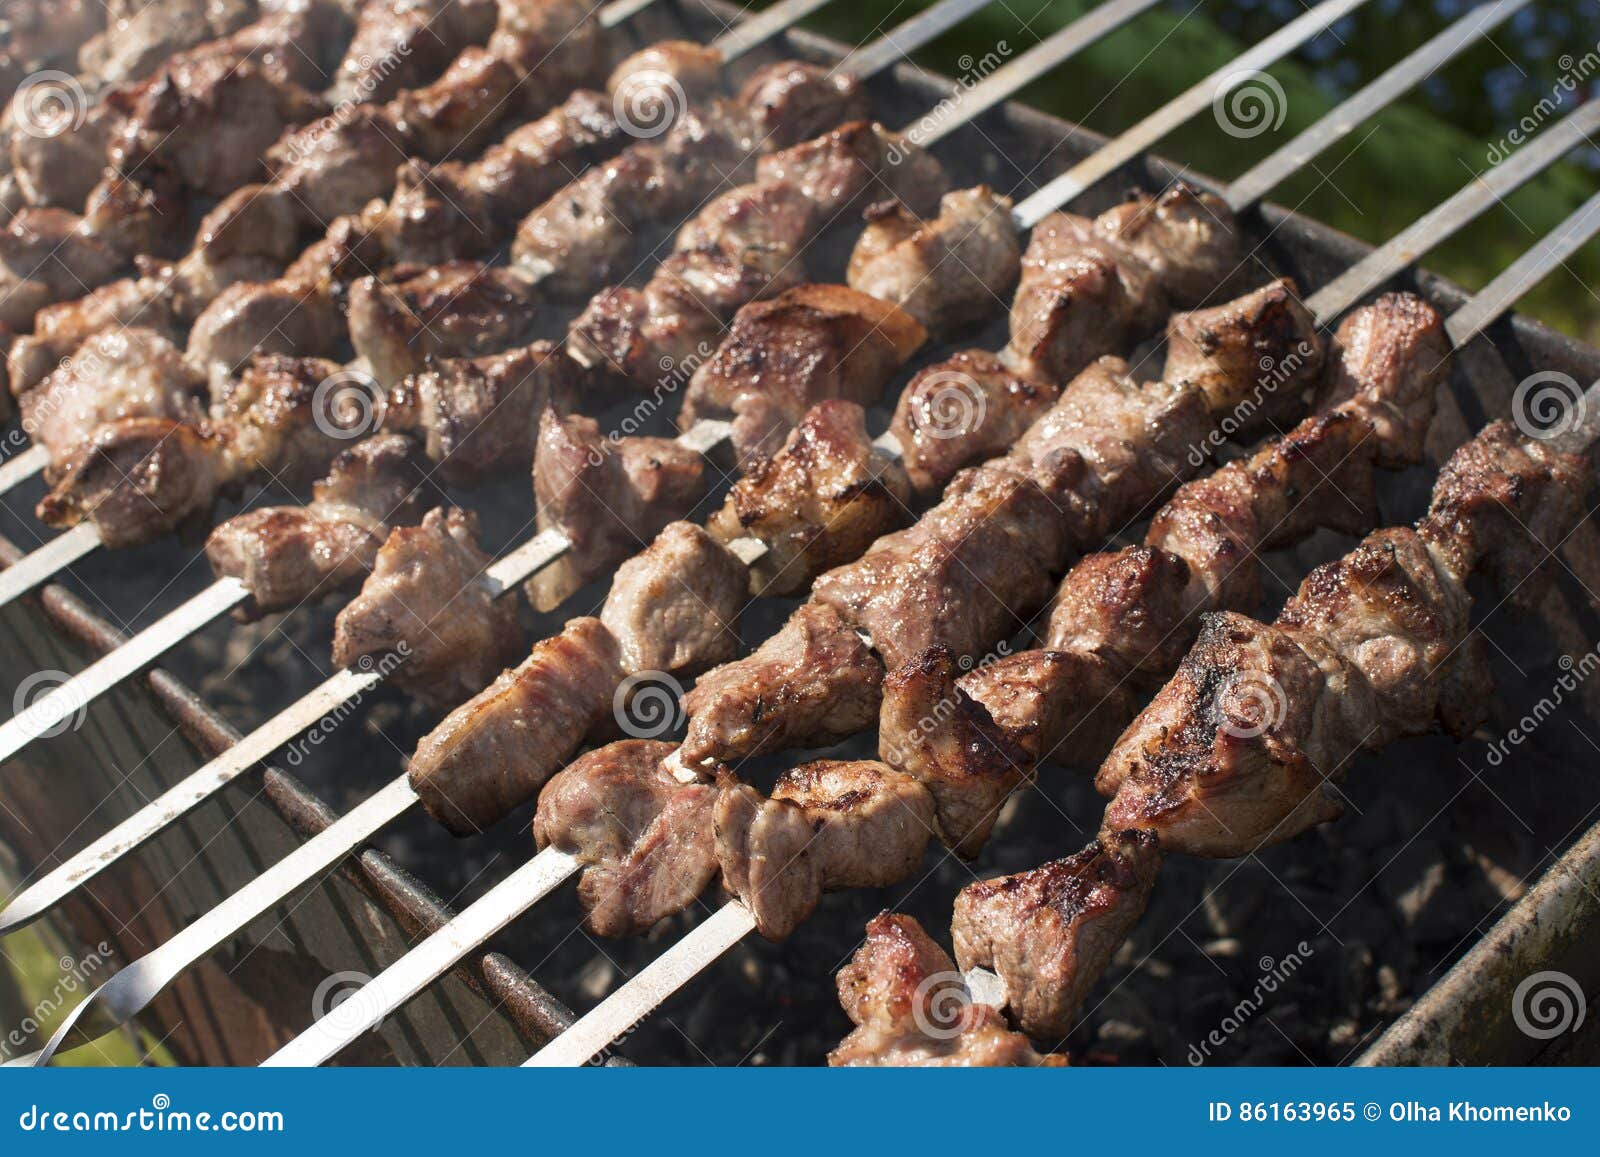 Grilling Marinated Meat on a Brazier. Stock Image - Image of broil ...